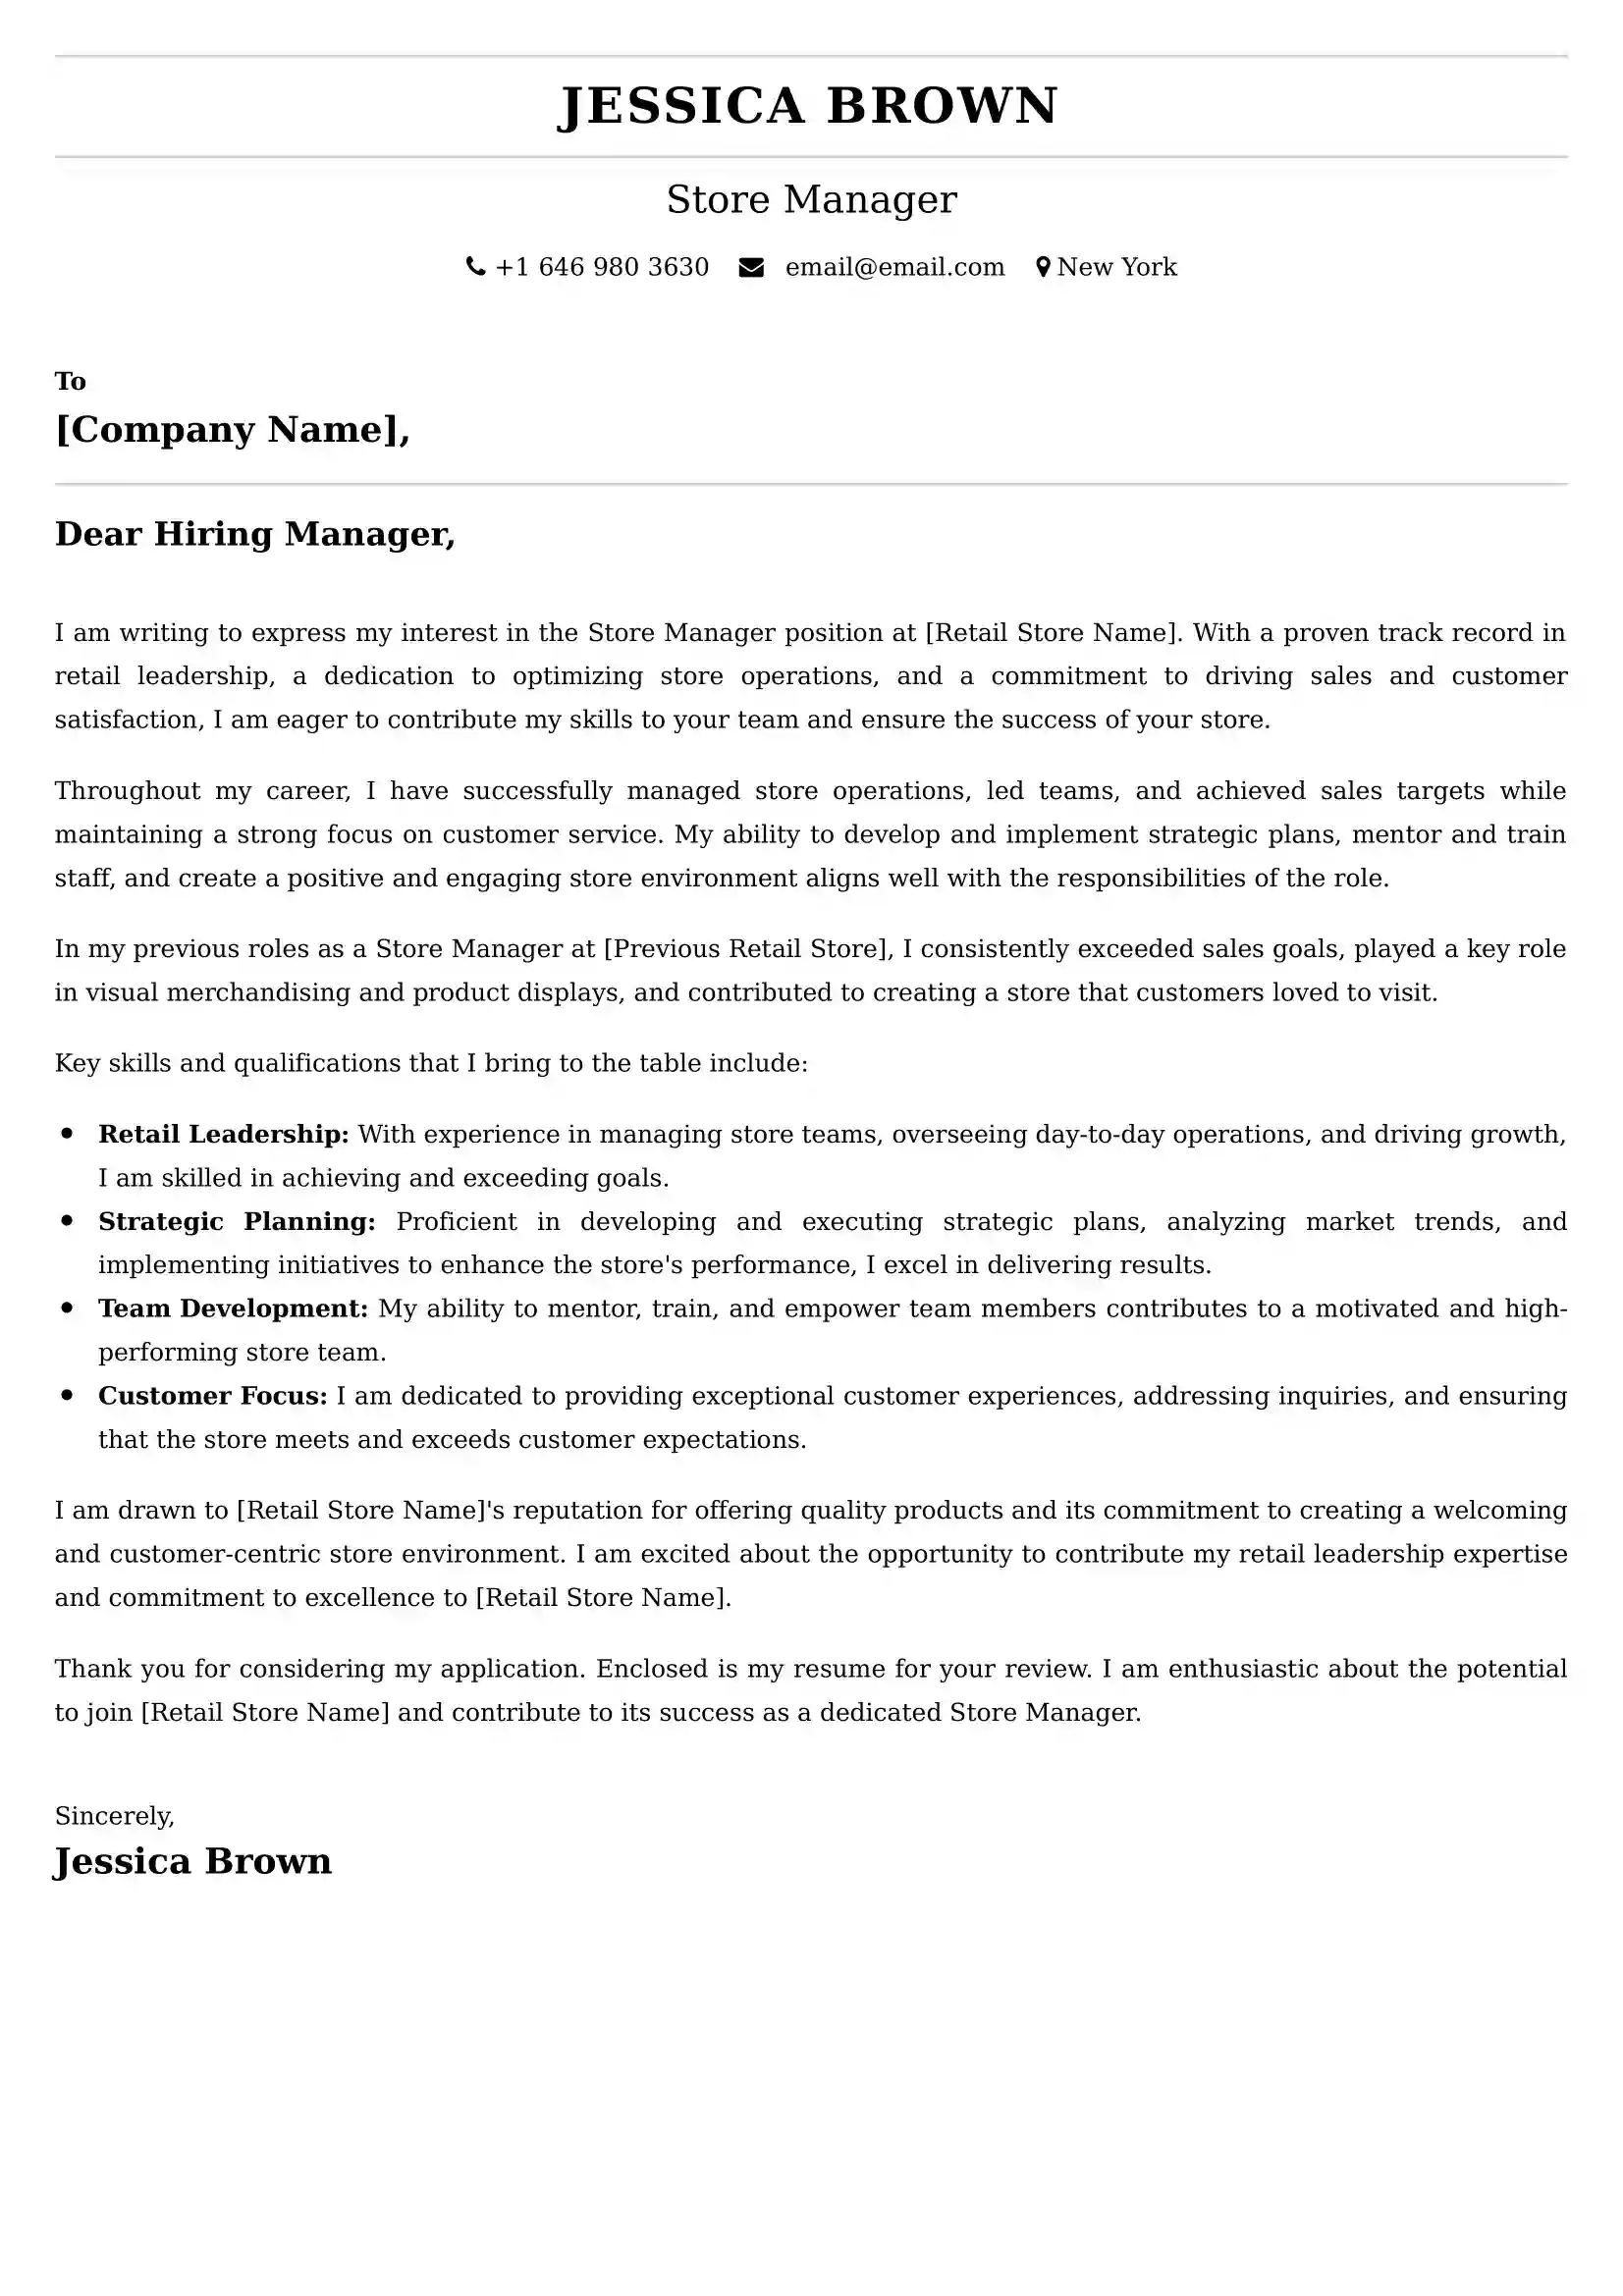 Store Manager Cover Letter Examples Australia